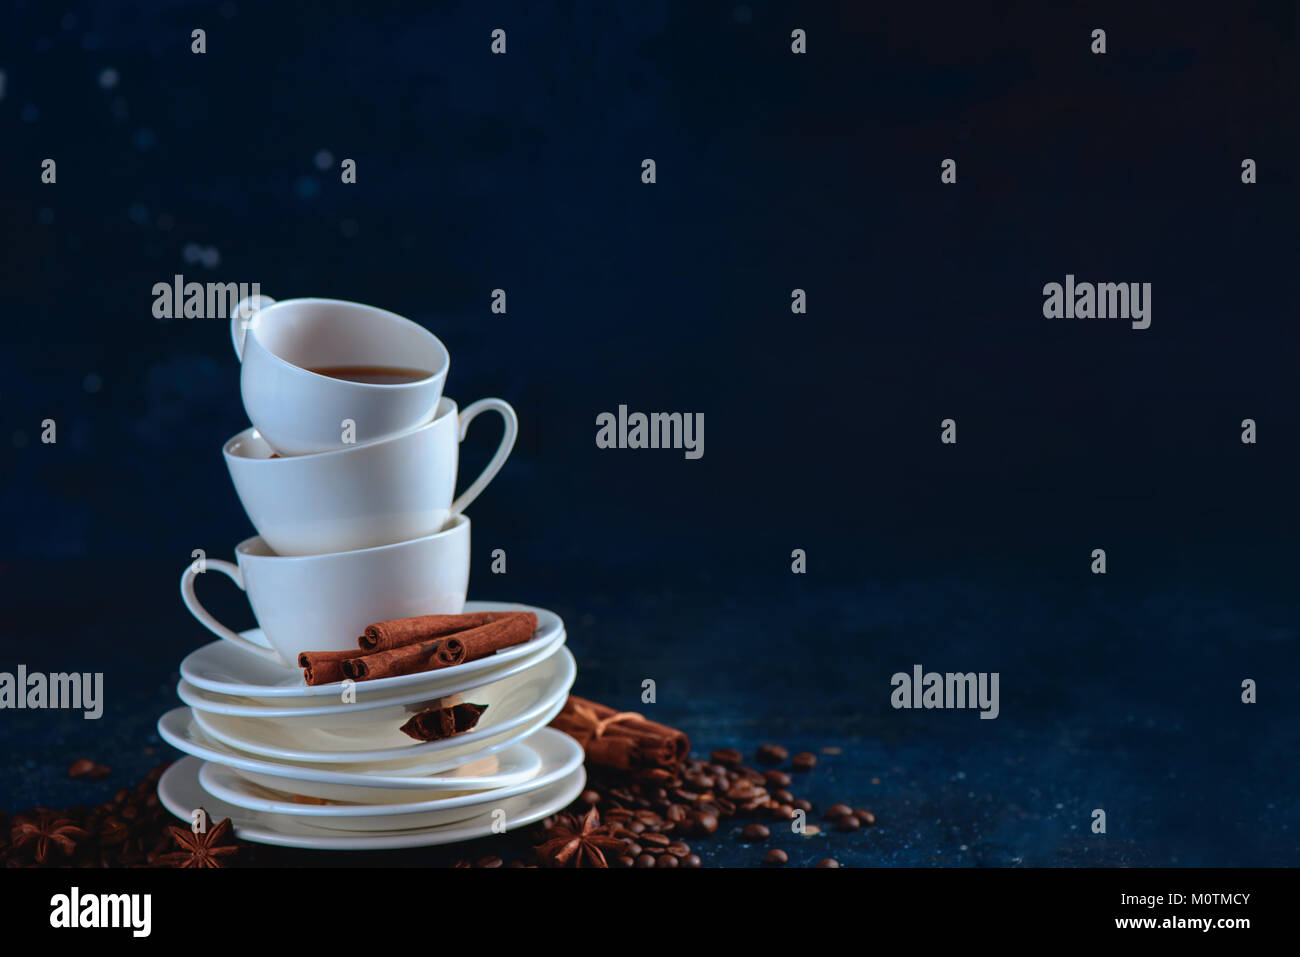 Header with a stack of balancing white coffee cups and tea saucers, coffee beans and cinnamon on a dark blue background. Dark food photography with co Stock Photo